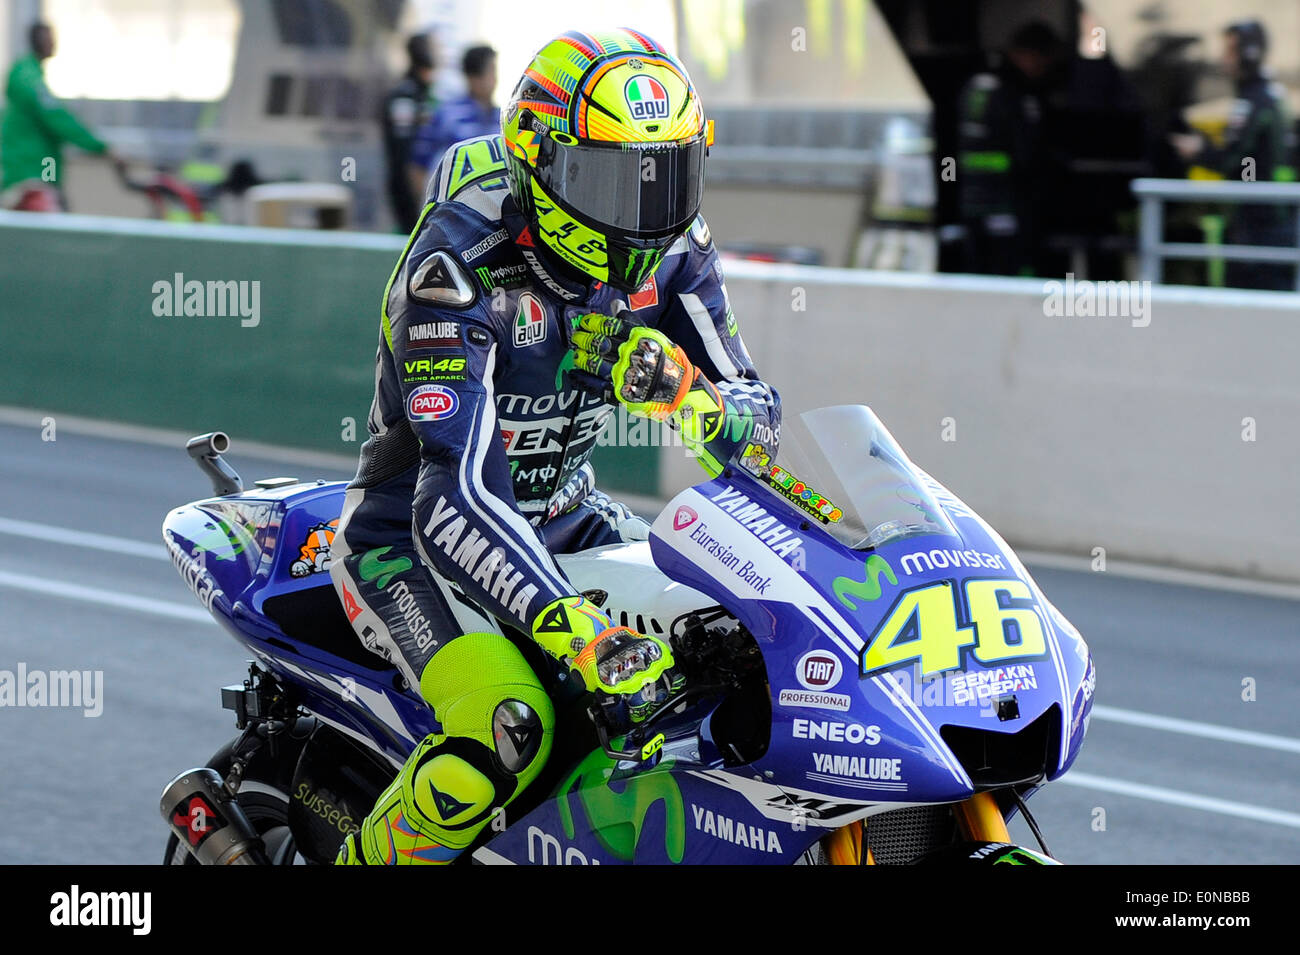 Valentino Rossi (Movistar Yamaha Team) in action during the practice  sessions at Bugatti circuit in Le Mans Stock Photo - Alamy